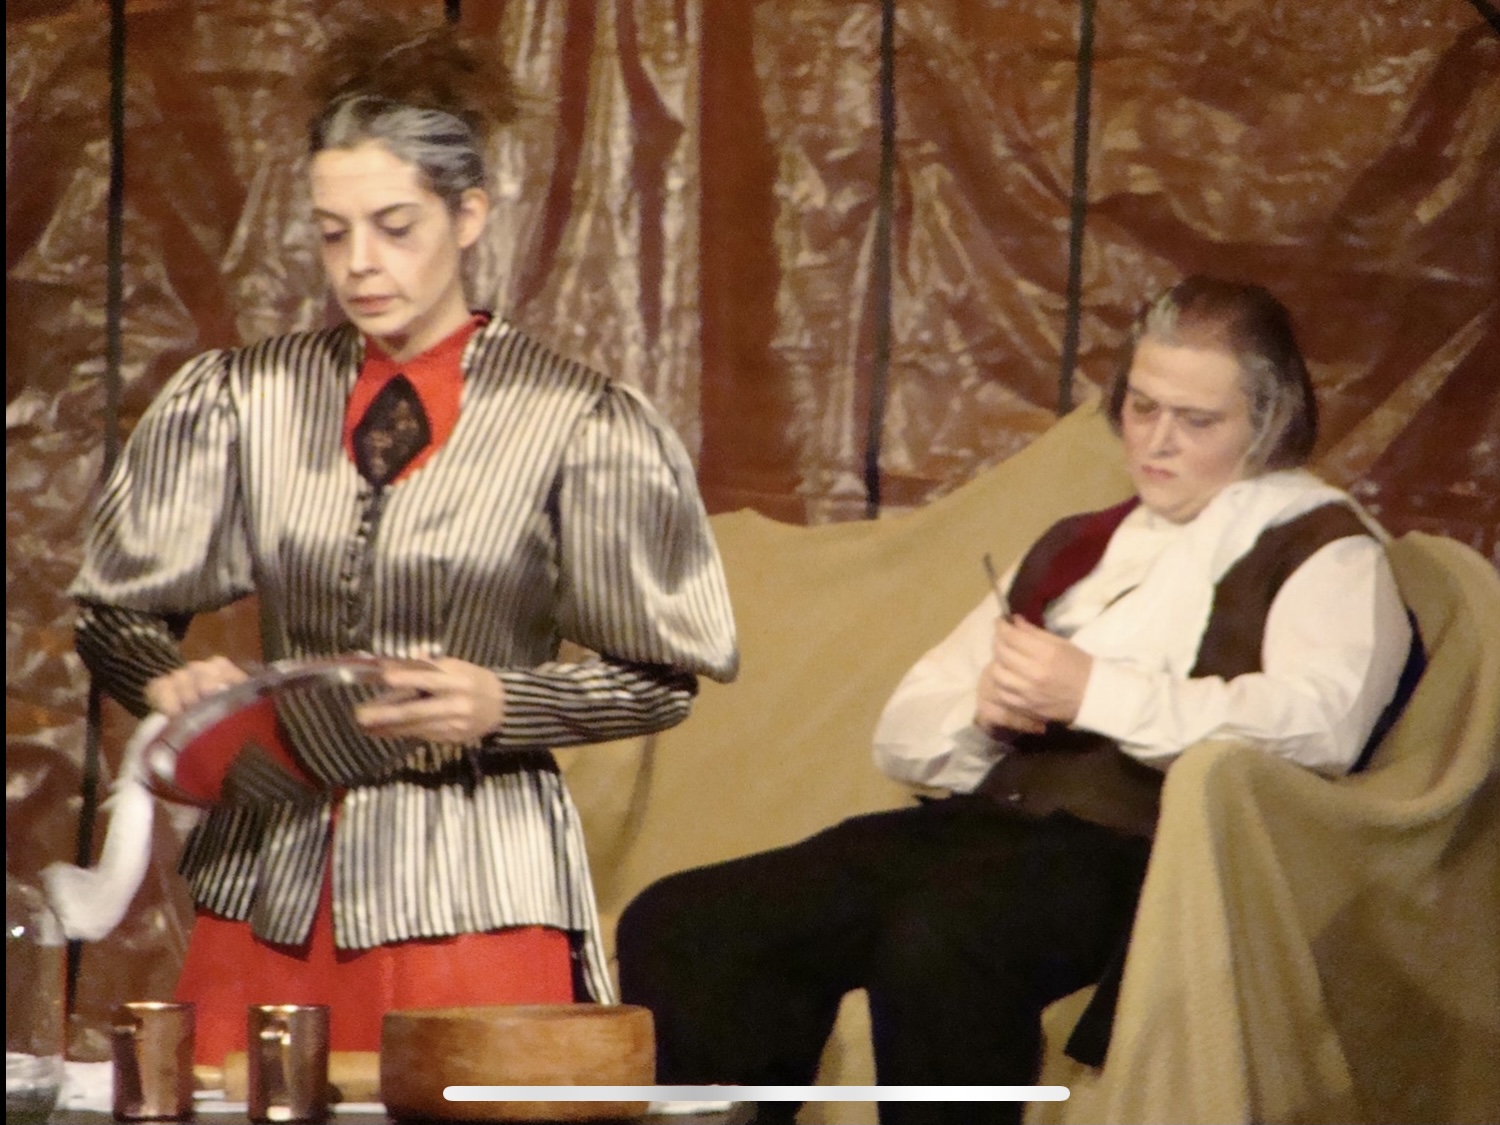 McCord (left) as Mrs. Lovett in Hill College’s 2015 production of Sweeney Todd: The Demon Barber of Fleet Street.